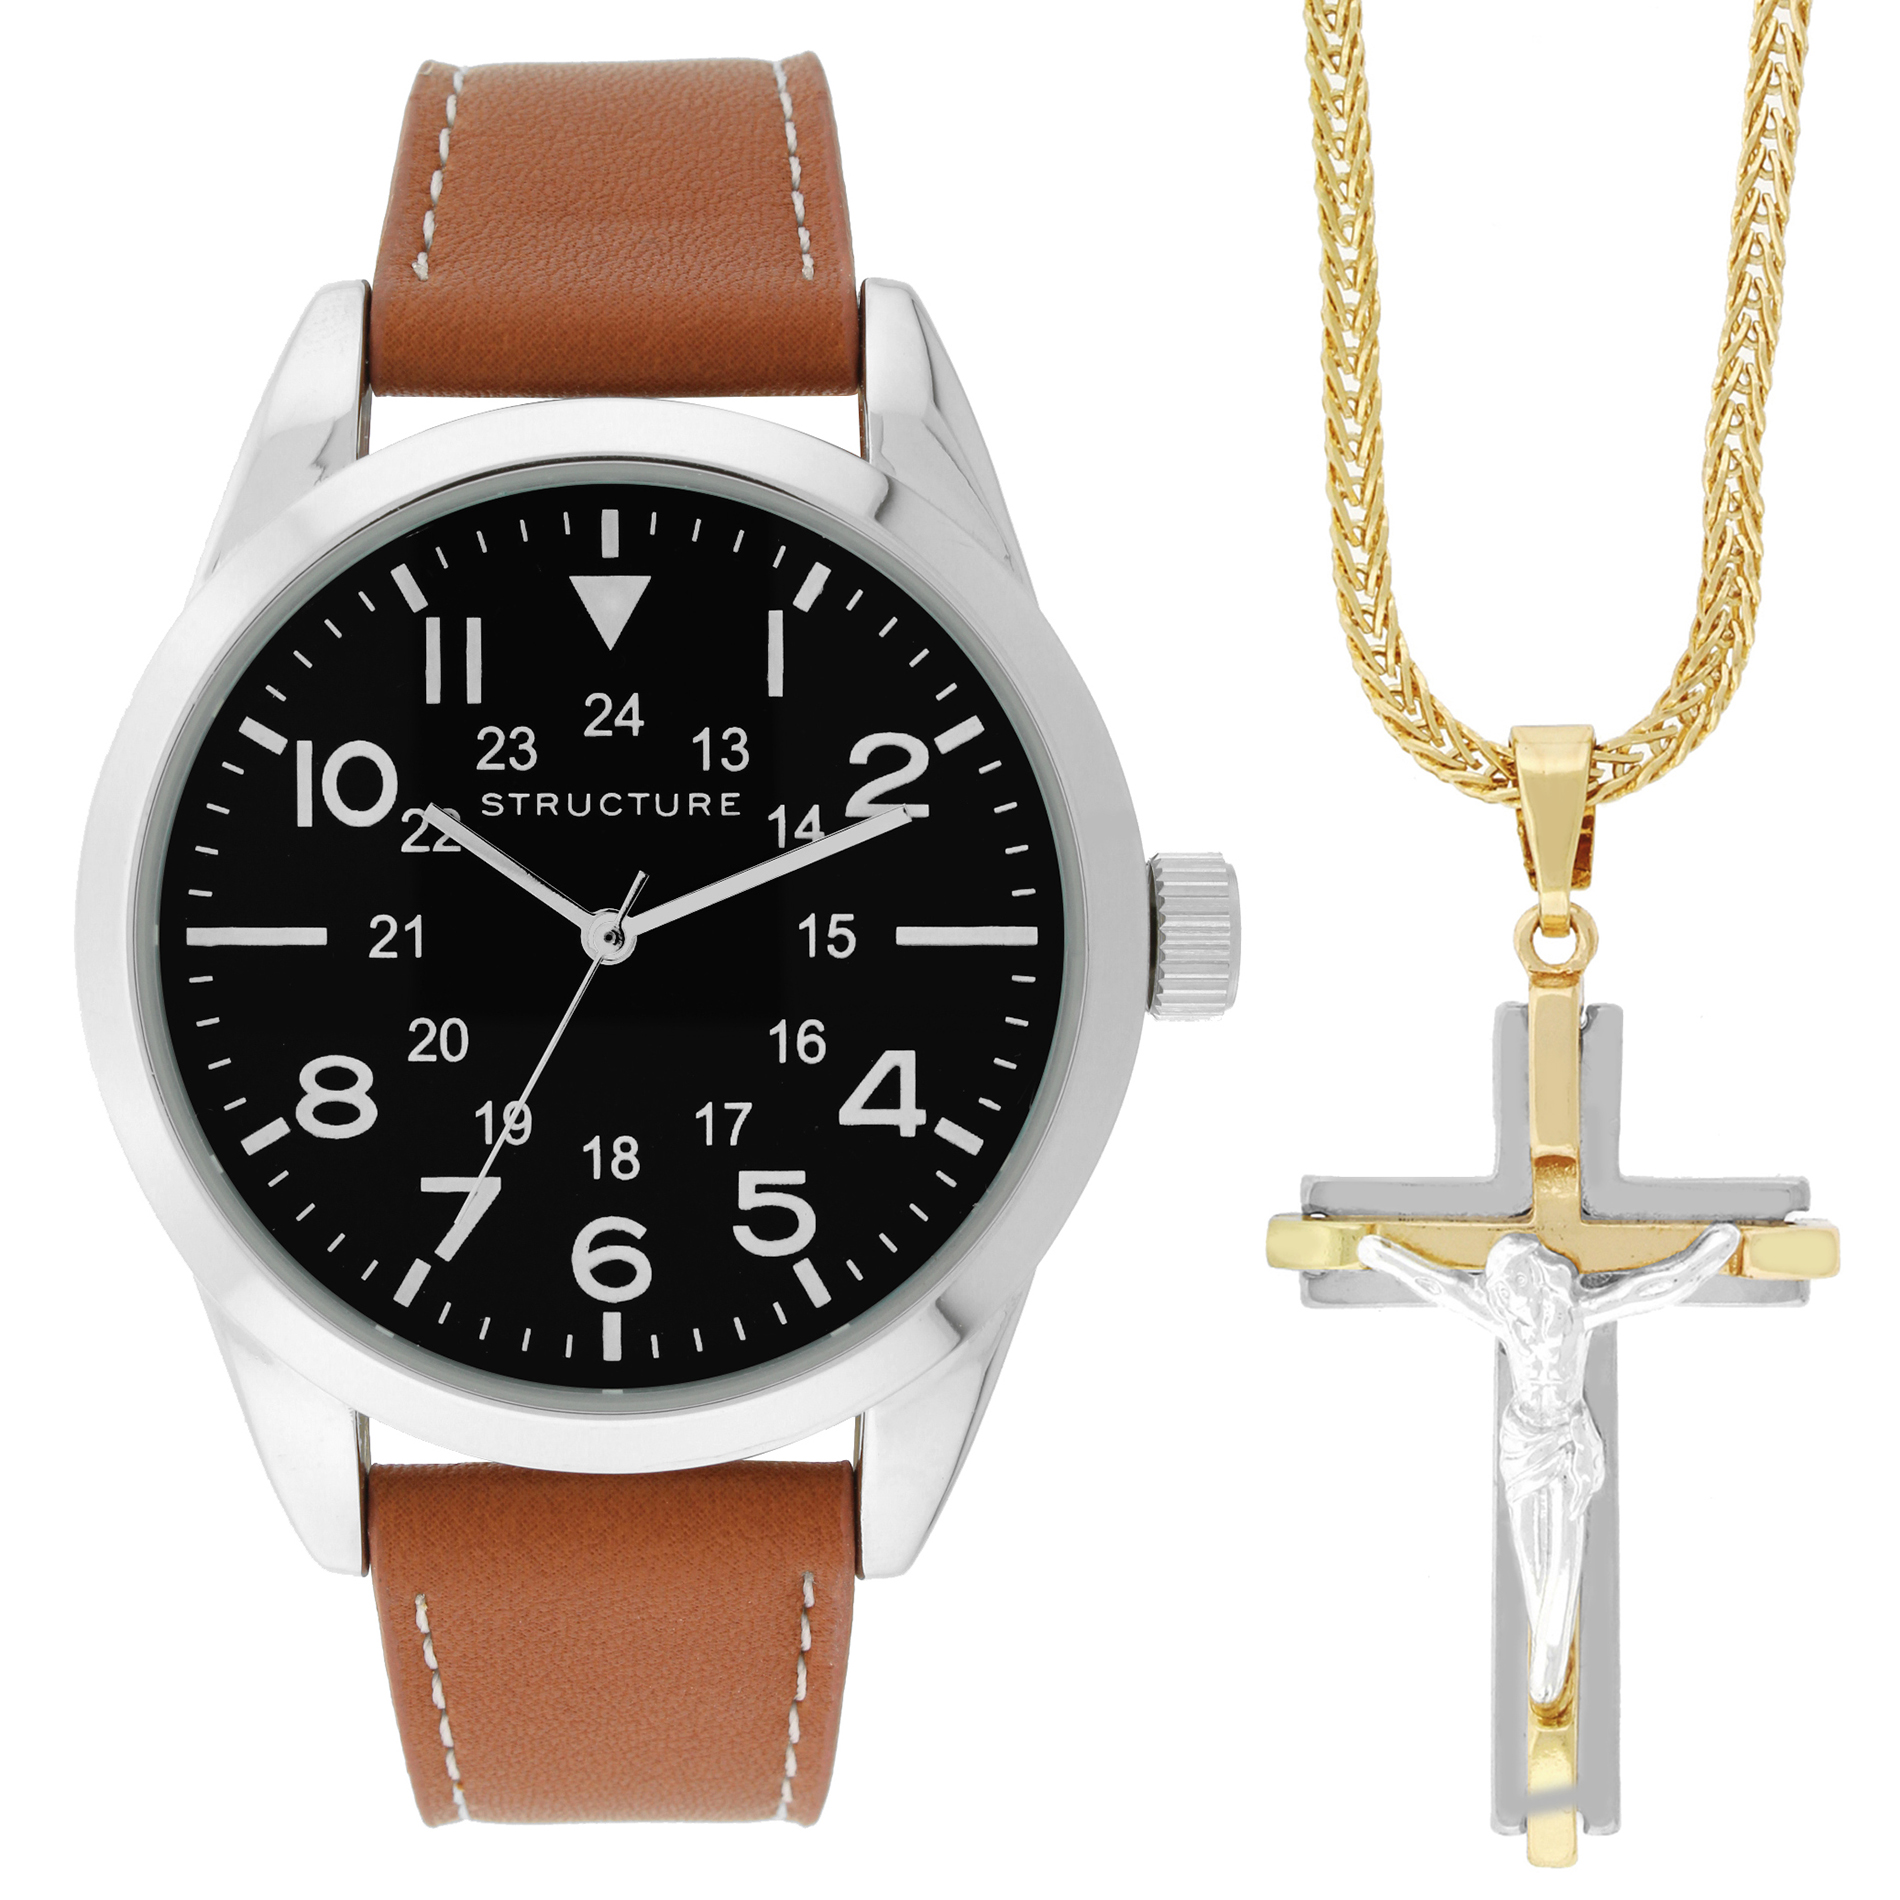 Men's Tan Strap Watch and Cross Necklace Set